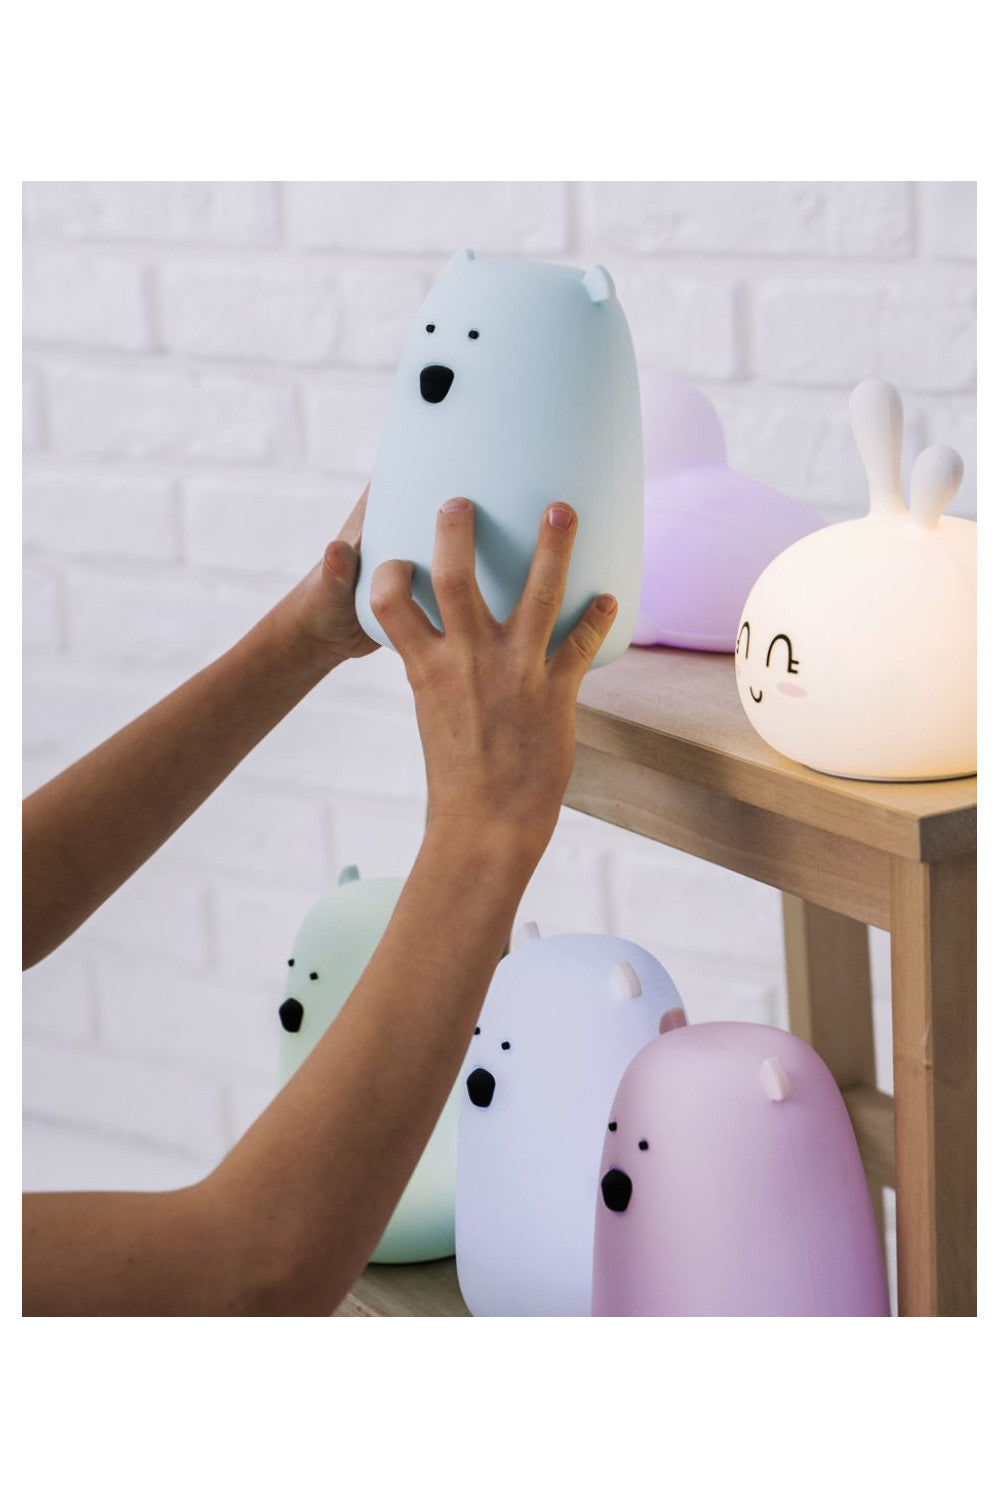 A white silicone lamp shaped like a teddy bear with protruding ears, piercing eyes, and a round belly. Soft to touch, with LED light, USB Type C power supply, and child-friendly design.